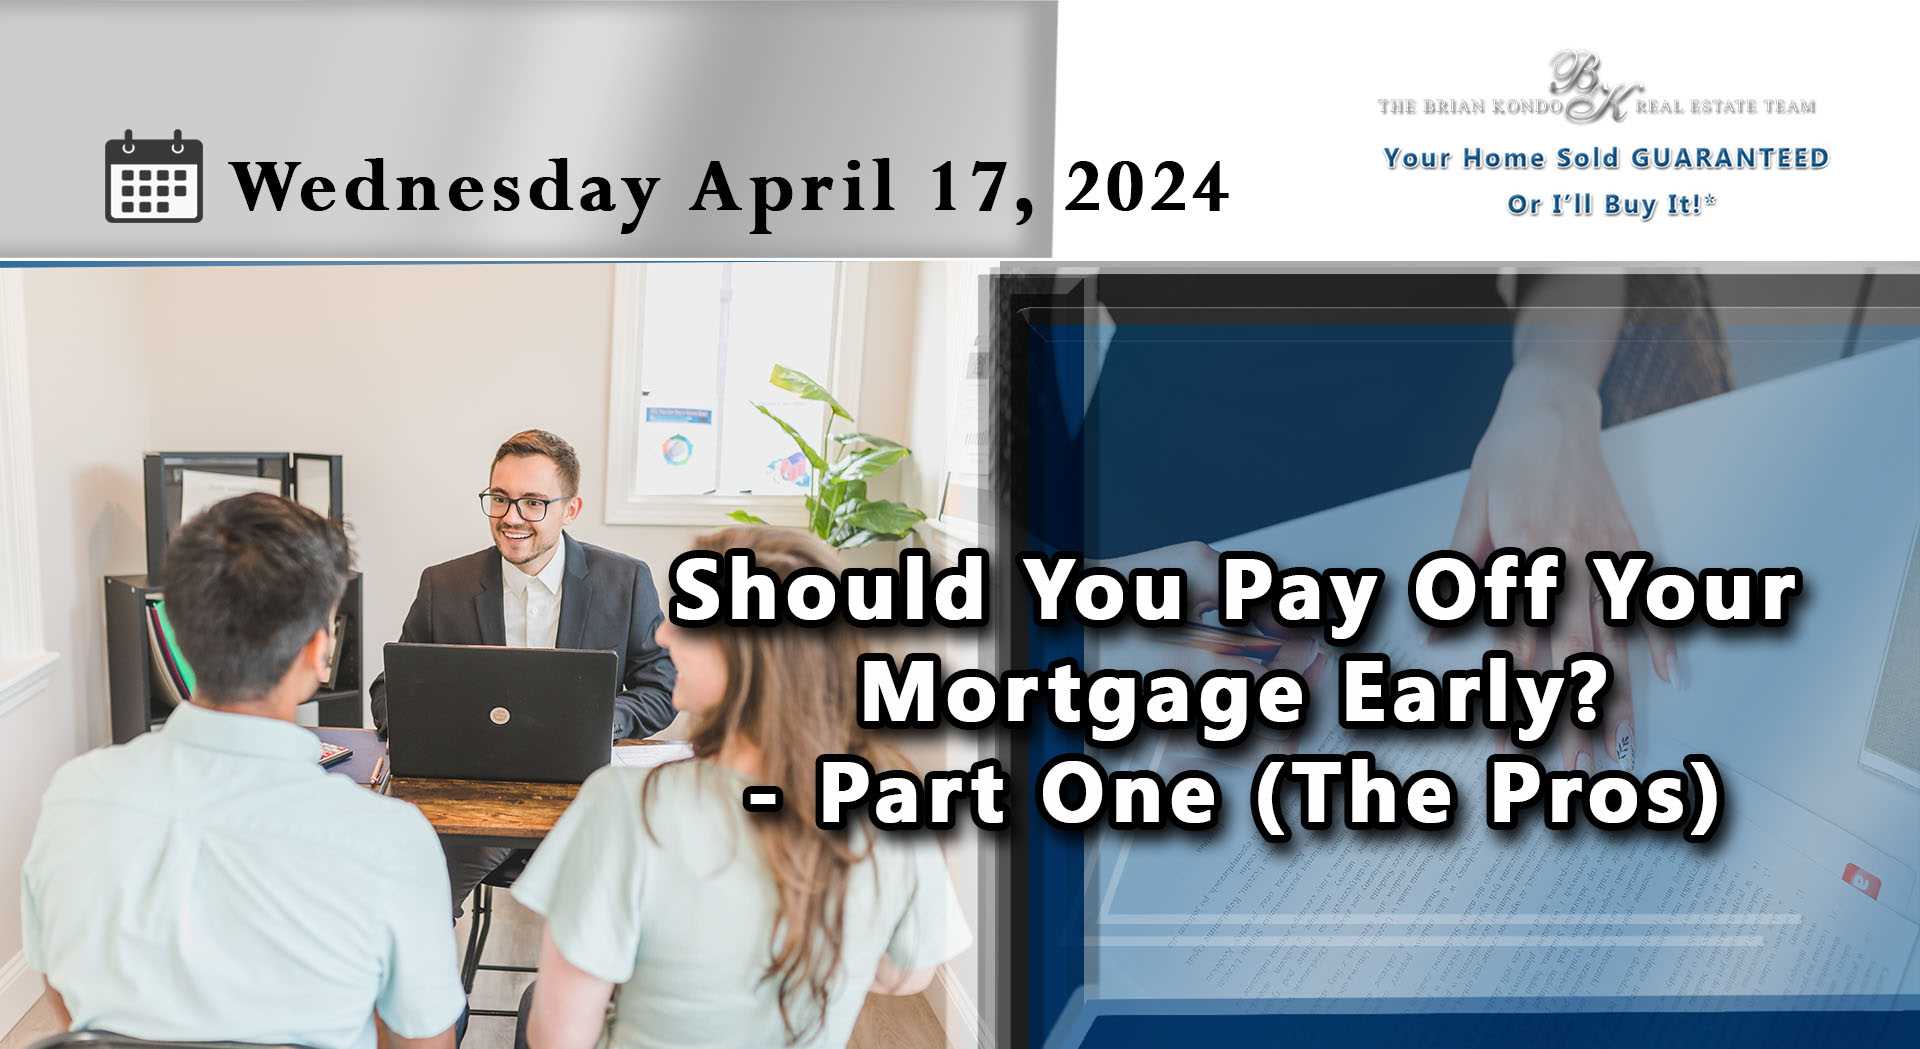 Should You Pay Off Your Mortgage Early? - Part One (The Pros)